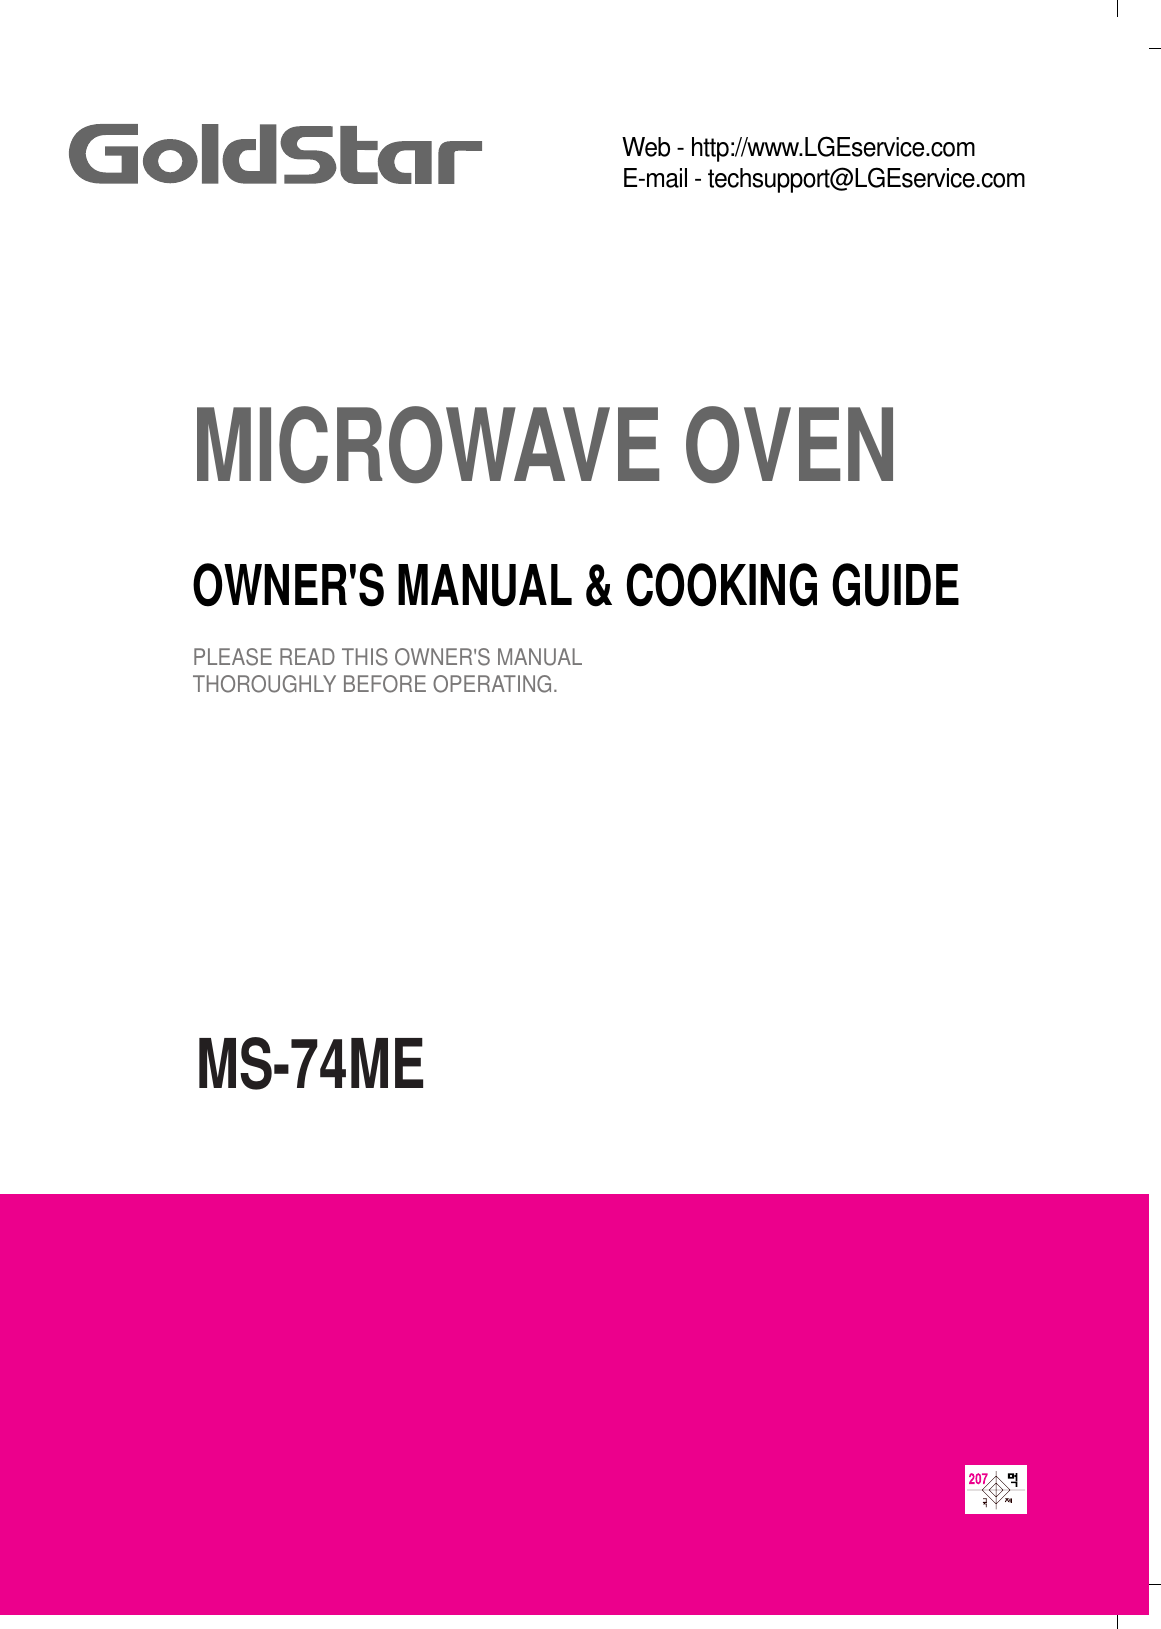 MS-74MEMICROWAVE OVENOWNER&apos;S MANUAL &amp; COOKING GUIDEPLEASE READ THIS OWNER&apos;S MANUALTHOROUGHLY BEFORE OPERATING.Web - http://www.LGEservice.comE-mail - techsupport@LGEservice.com